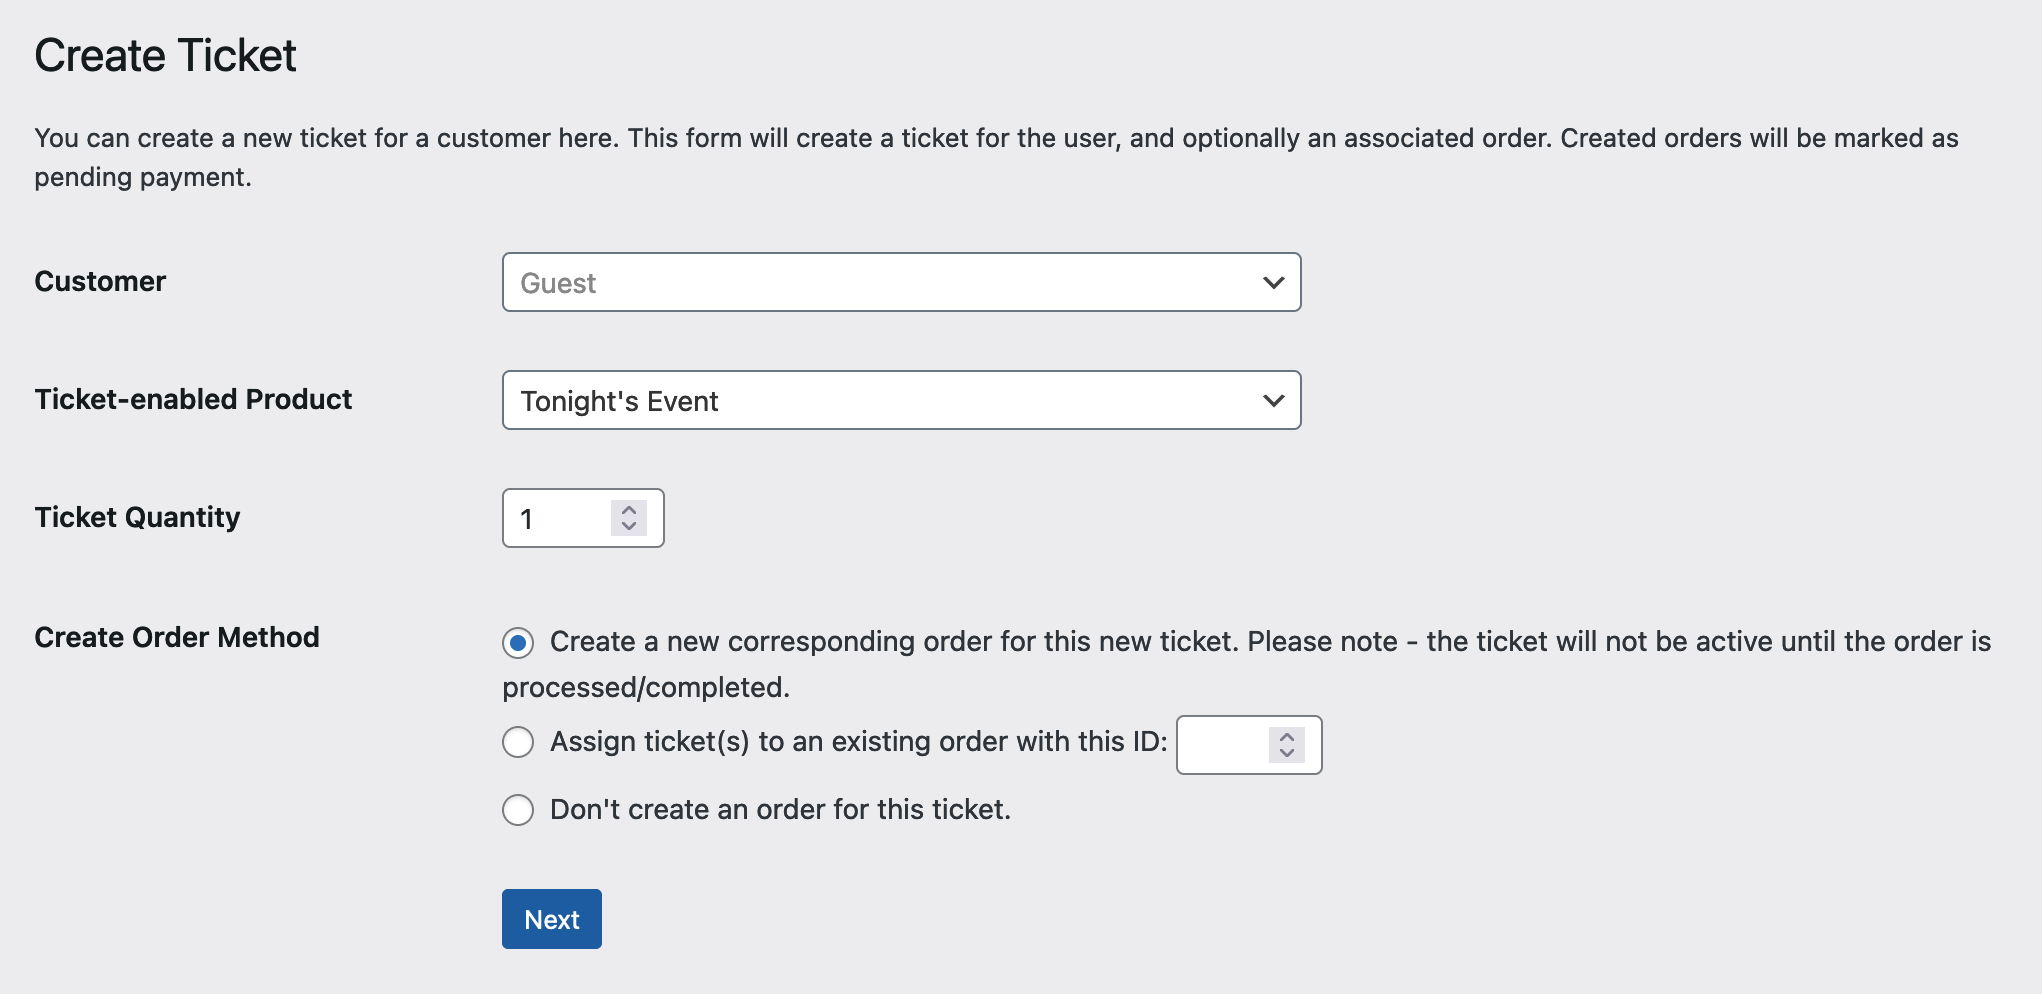 The initial Create Ticket screen with various options to complete for assigning tickets to existing customers and/or linking tickets to existing orders. 